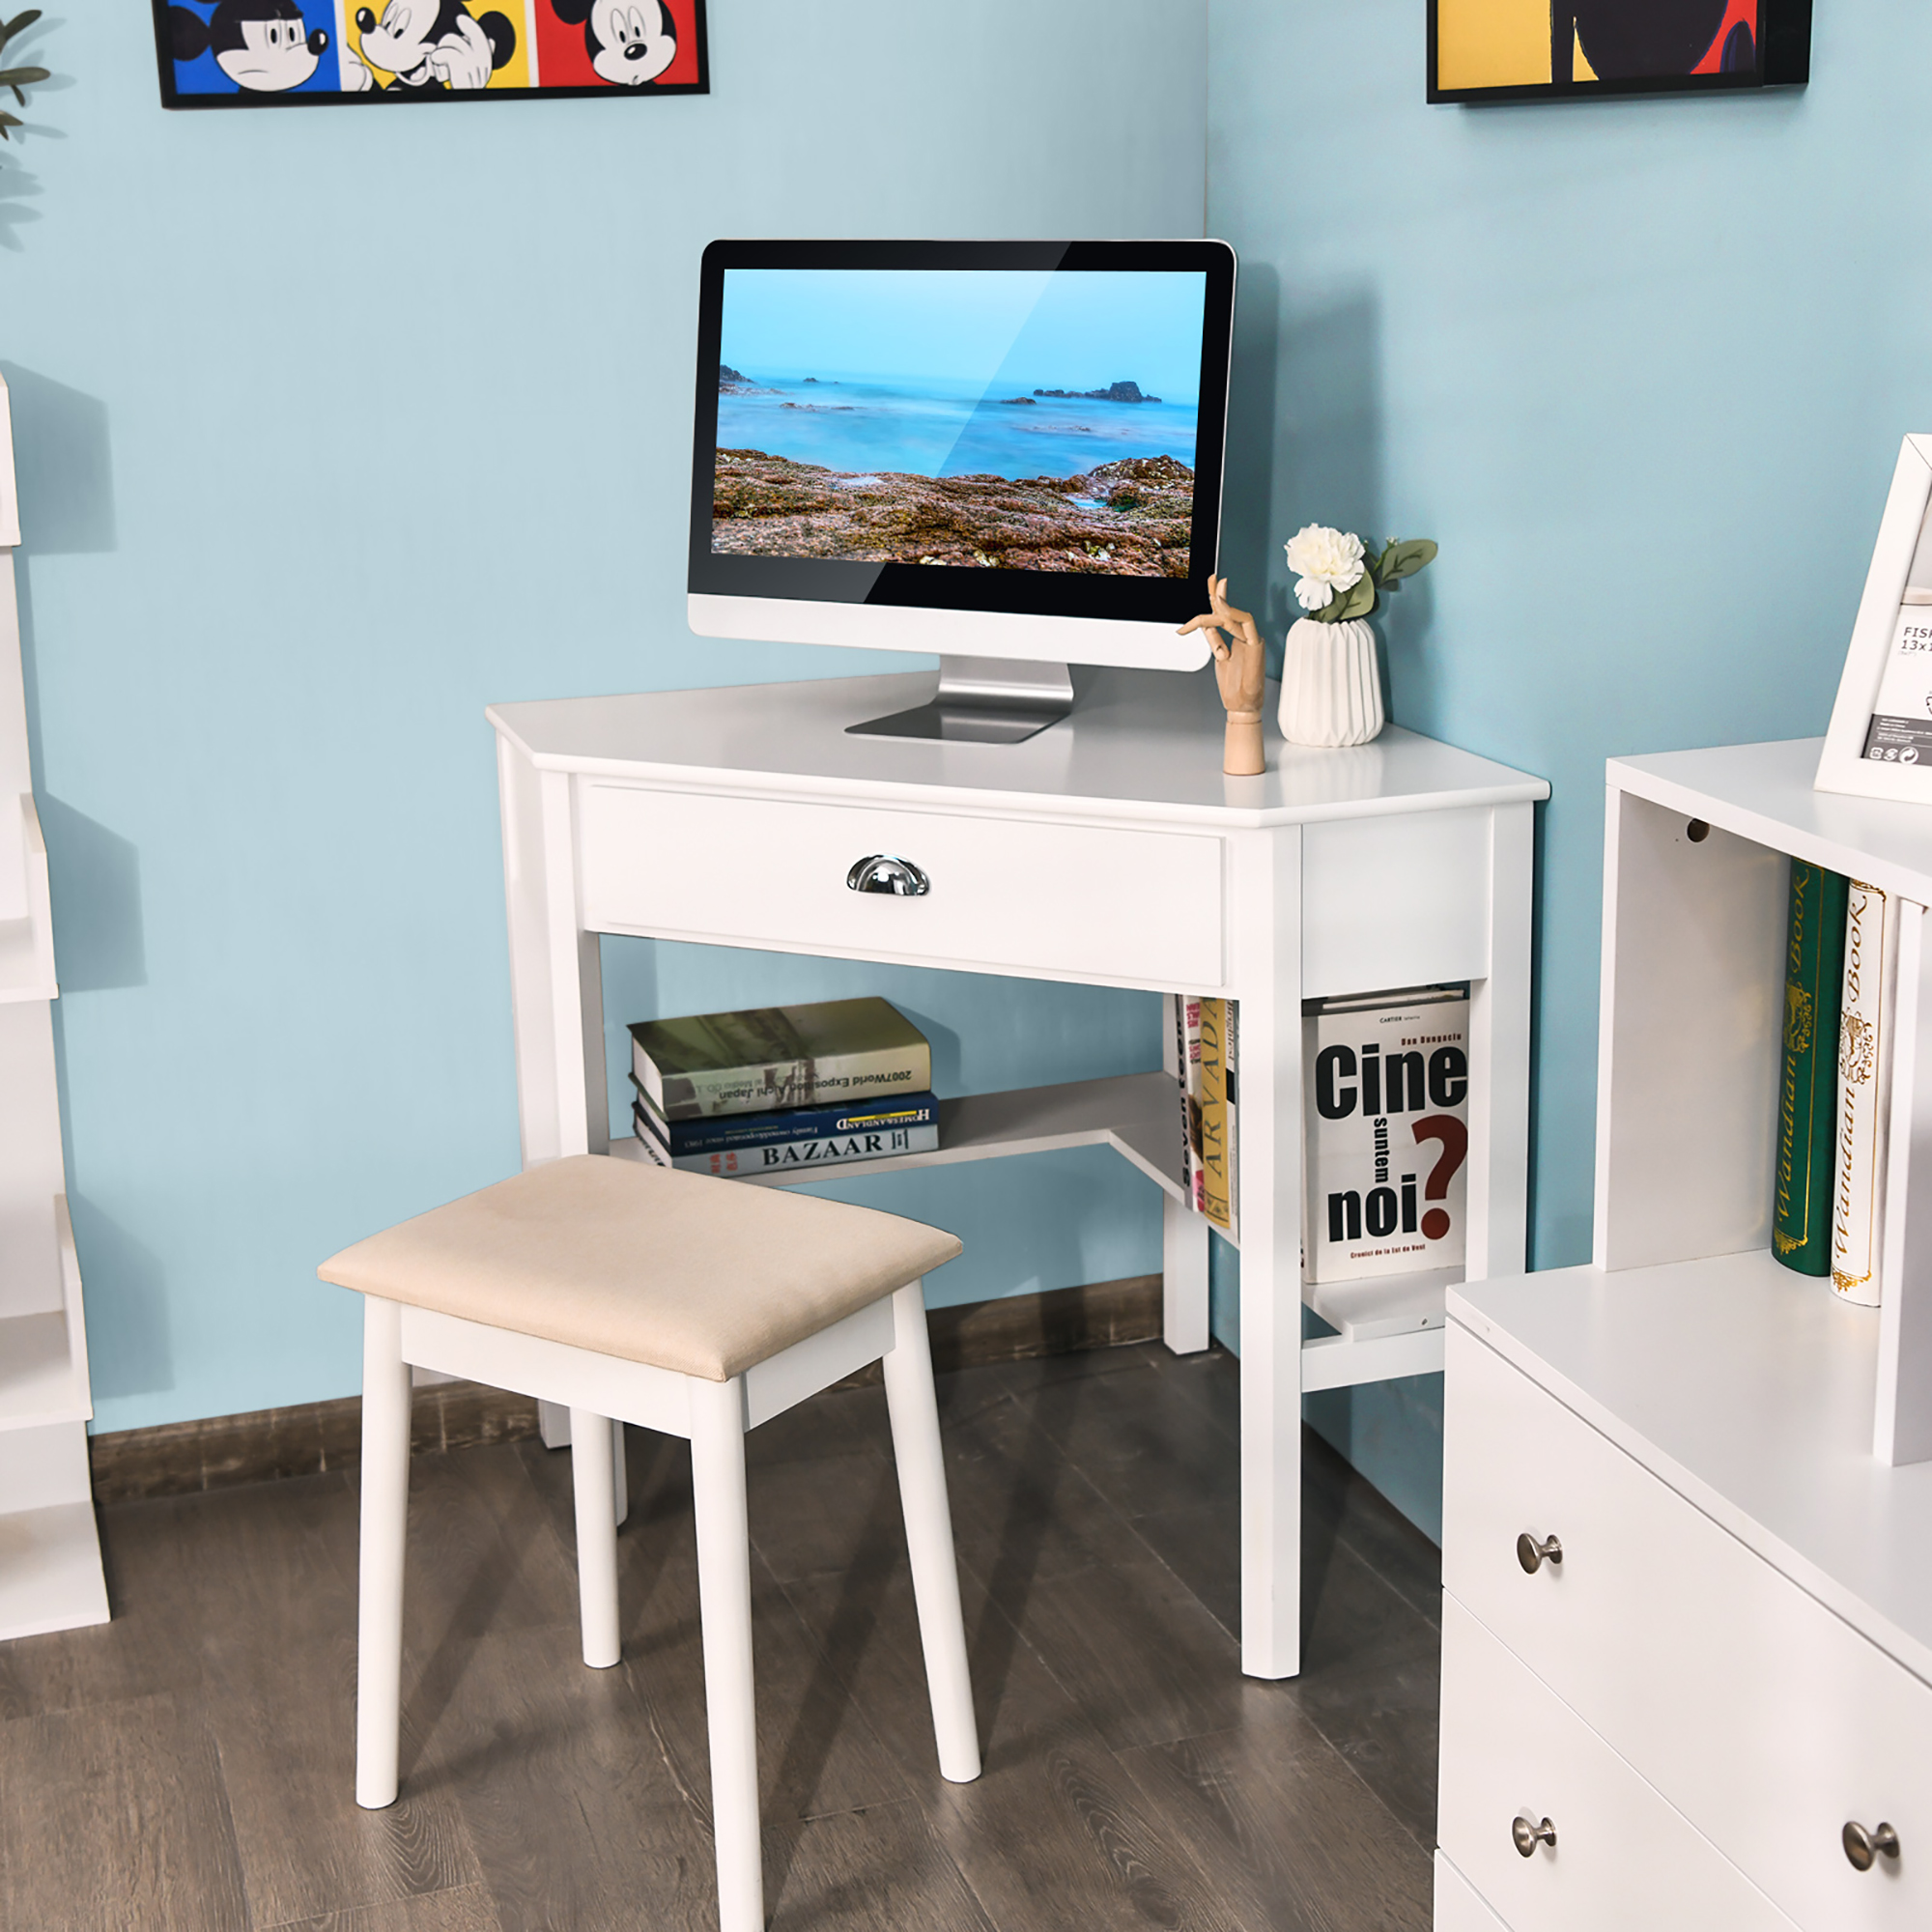 Costway Triangle Computer Desk Corner Office Desk Laptop Table w/ Drawer Shelves Rustic White - image 4 of 10